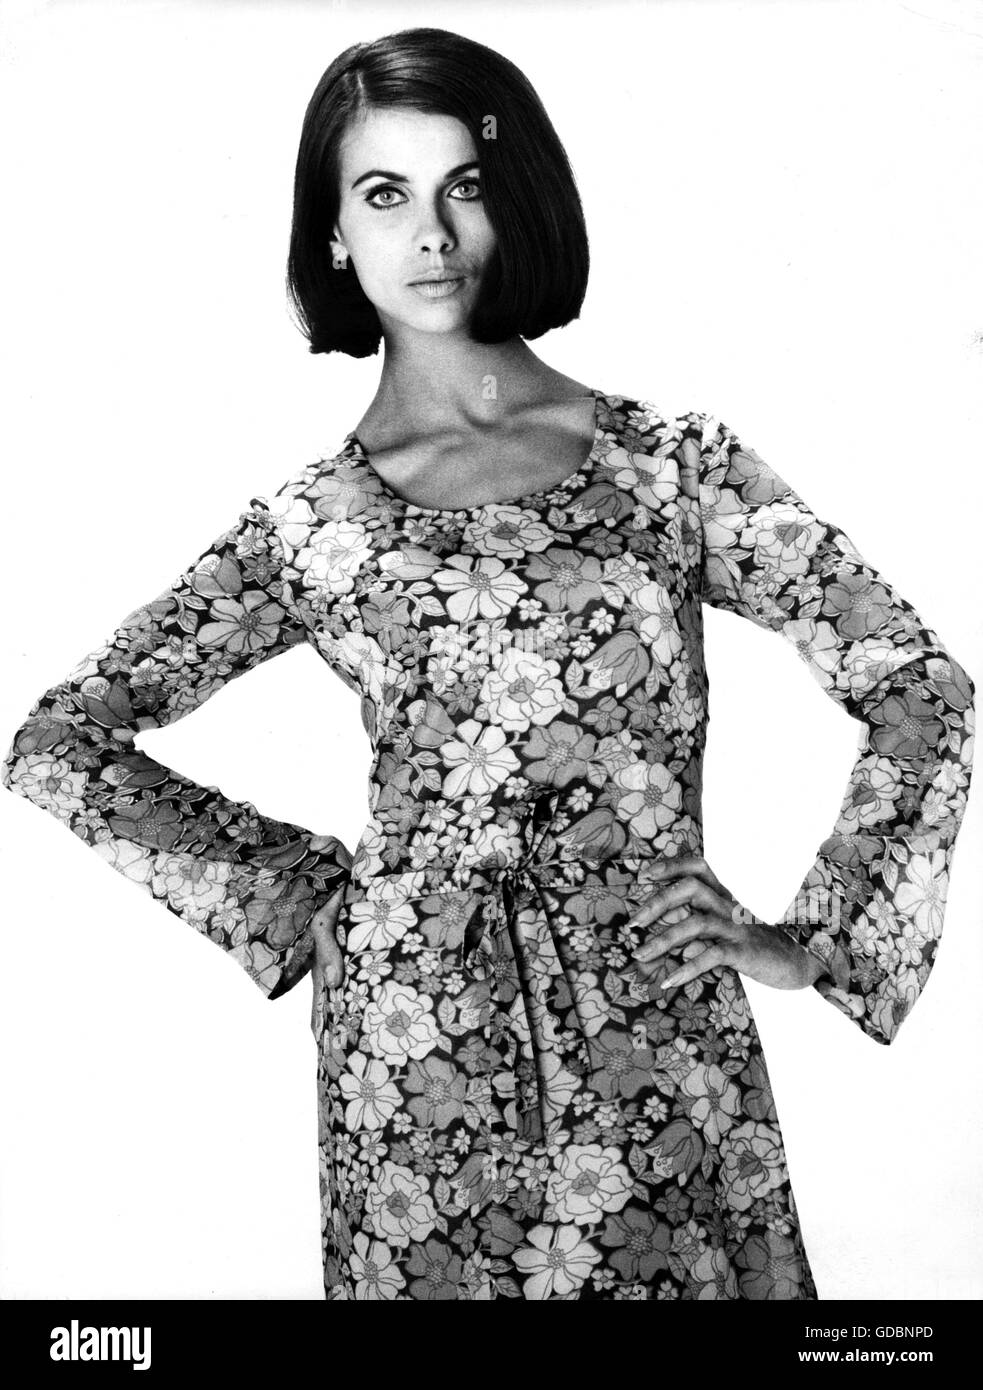 60S Fashion / Floral Dress Our beautiful pictures are available as Framed  Prints, Photos, Wall Art and Photo Gifts